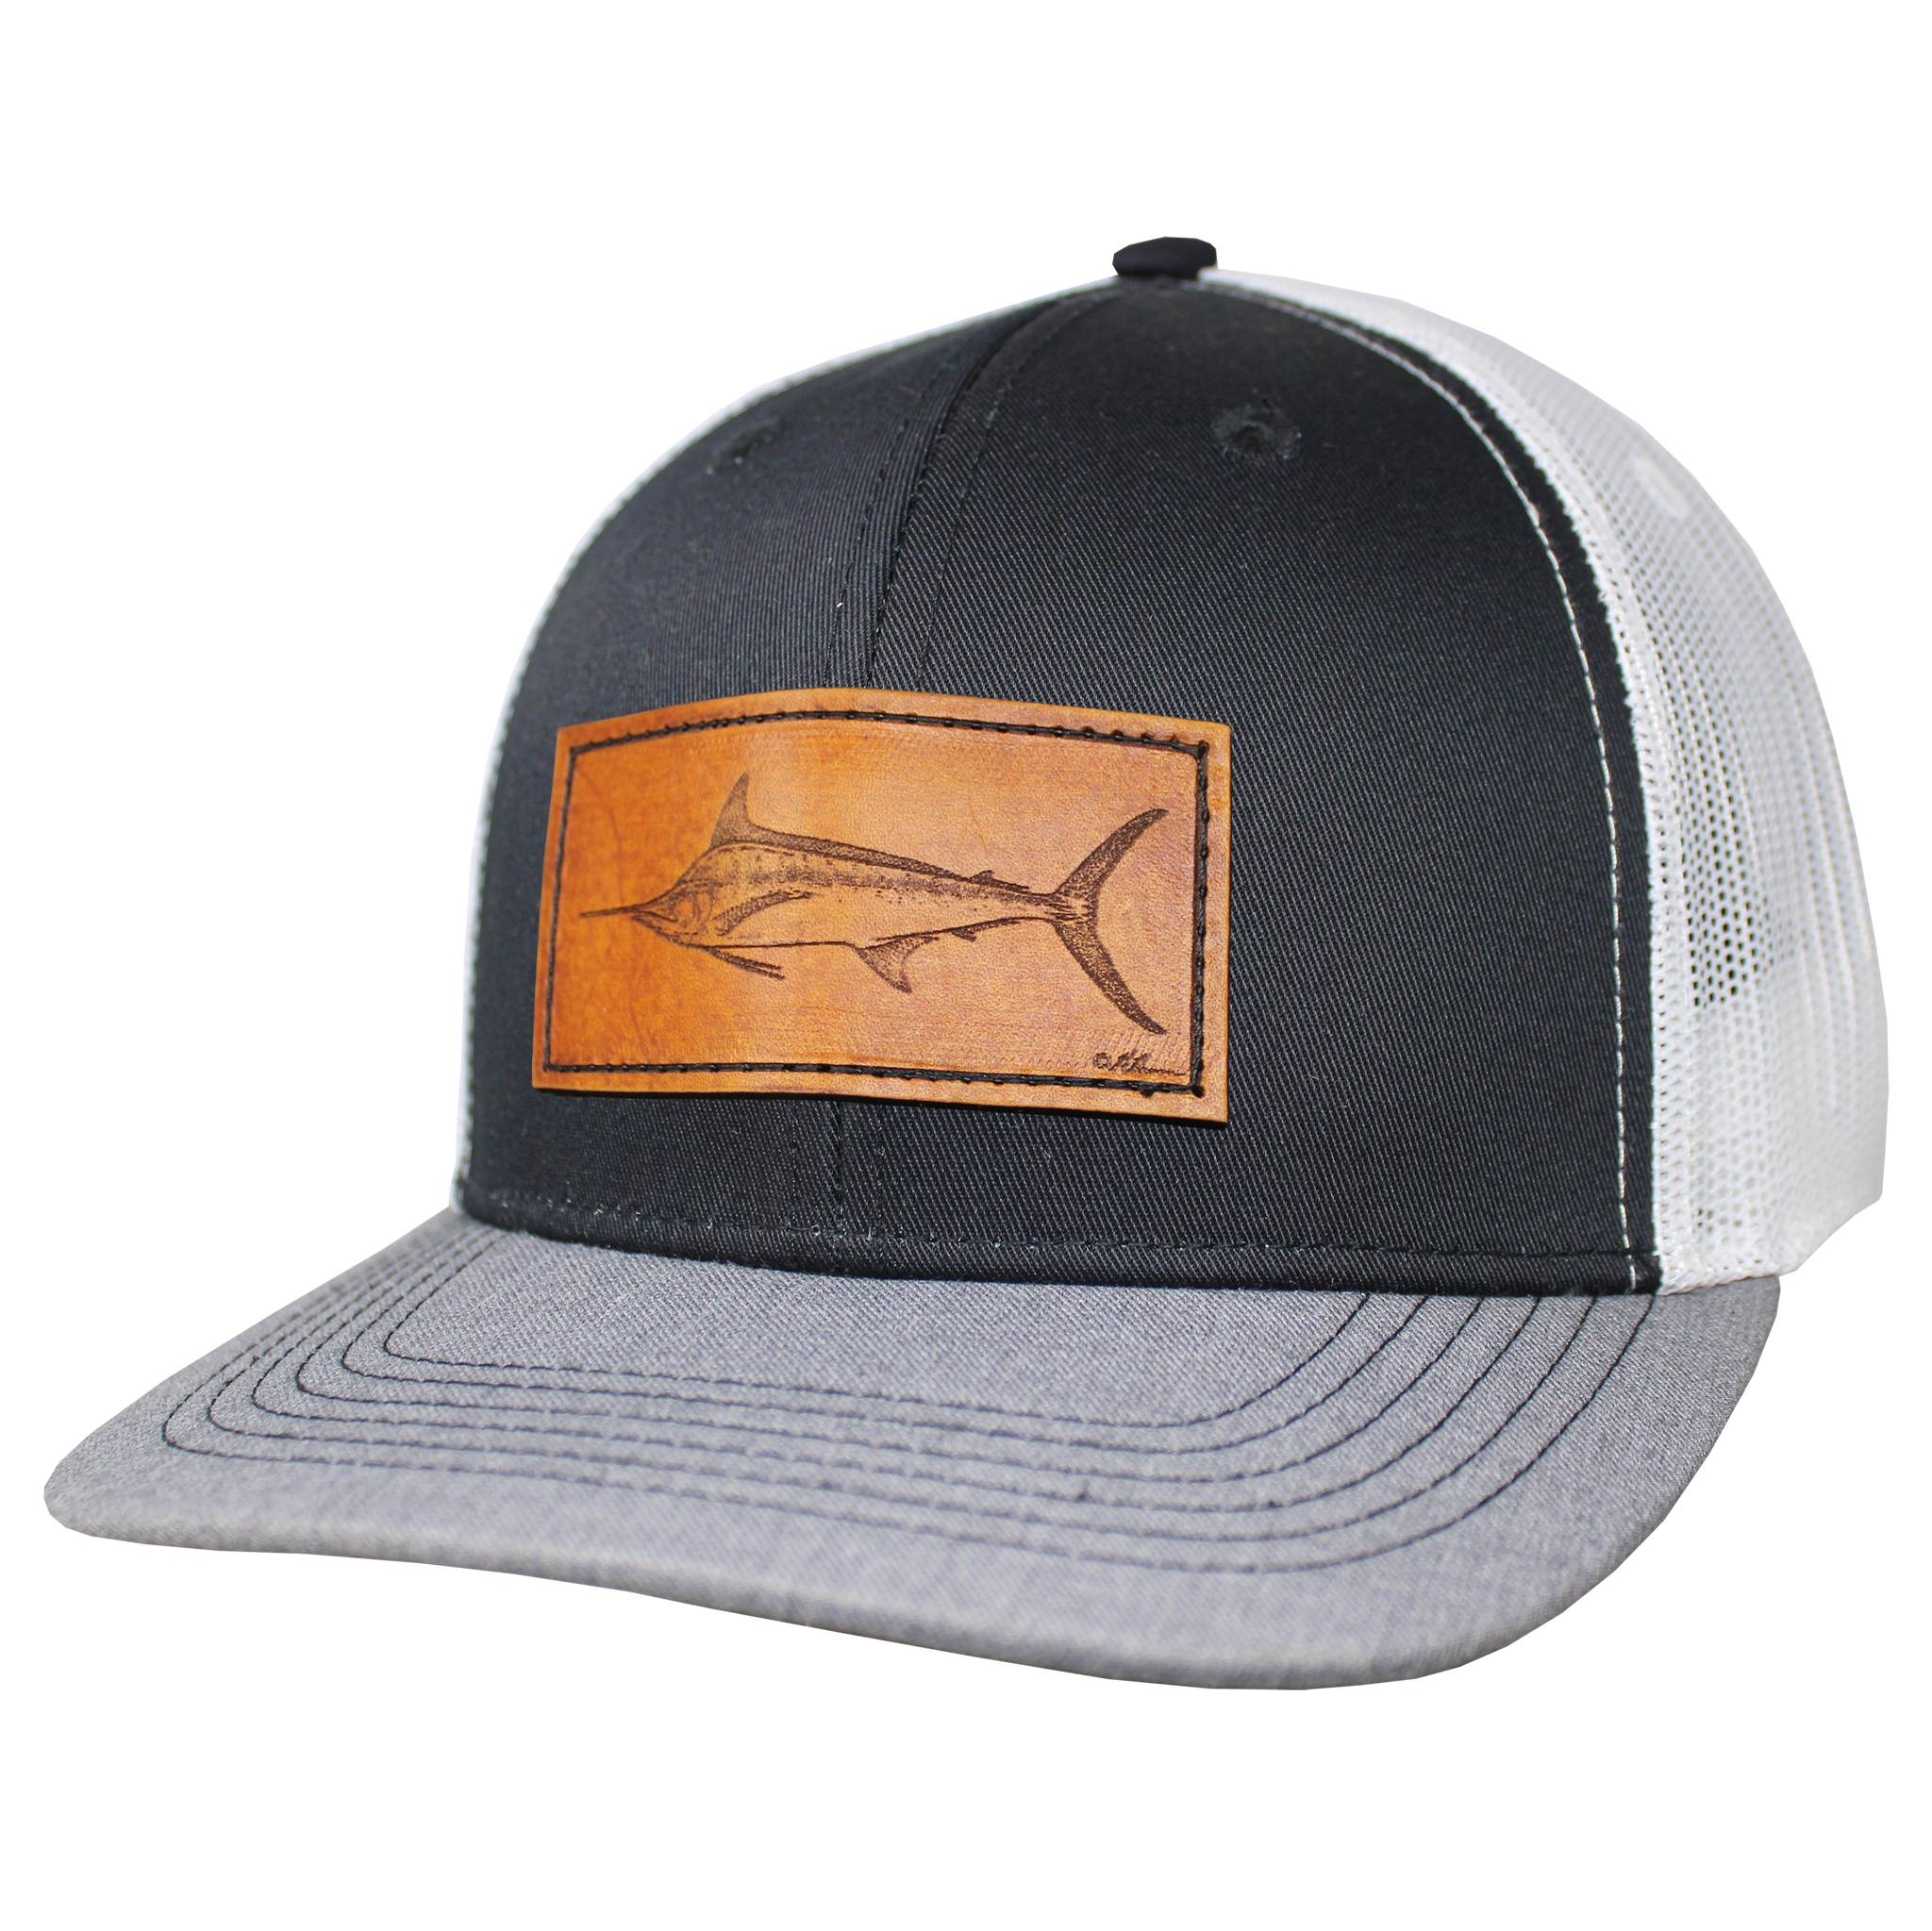 Trucker Performance Cap - Blue Marlin Leather Patch